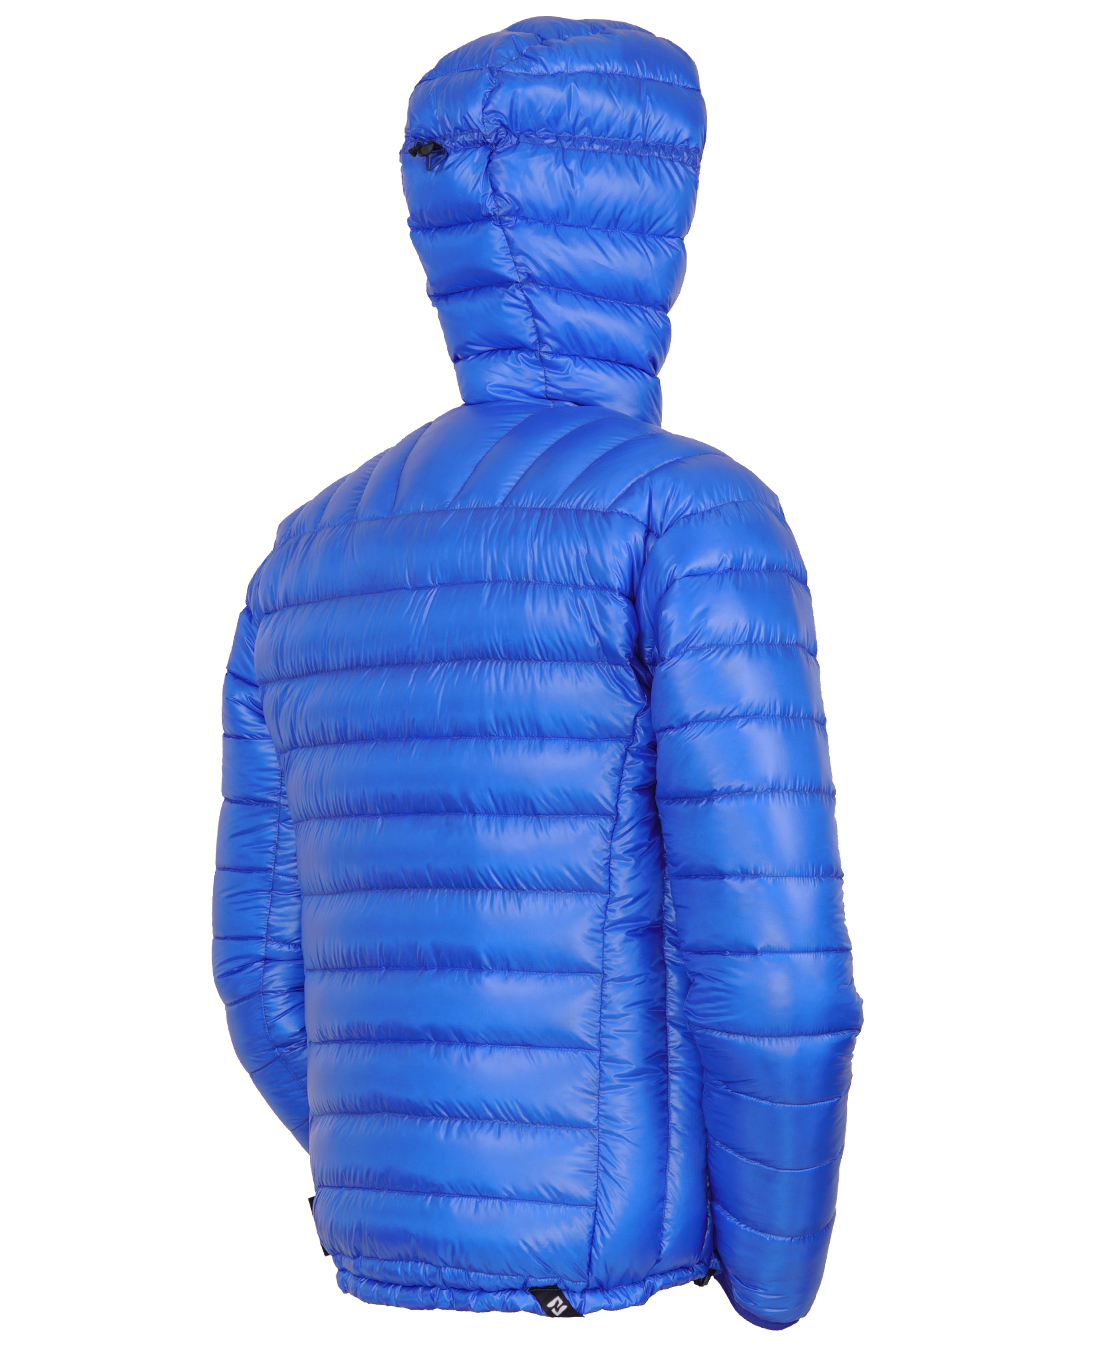 CUMULUS Incredilite - Down jacket | purchase online cheap at bivvy